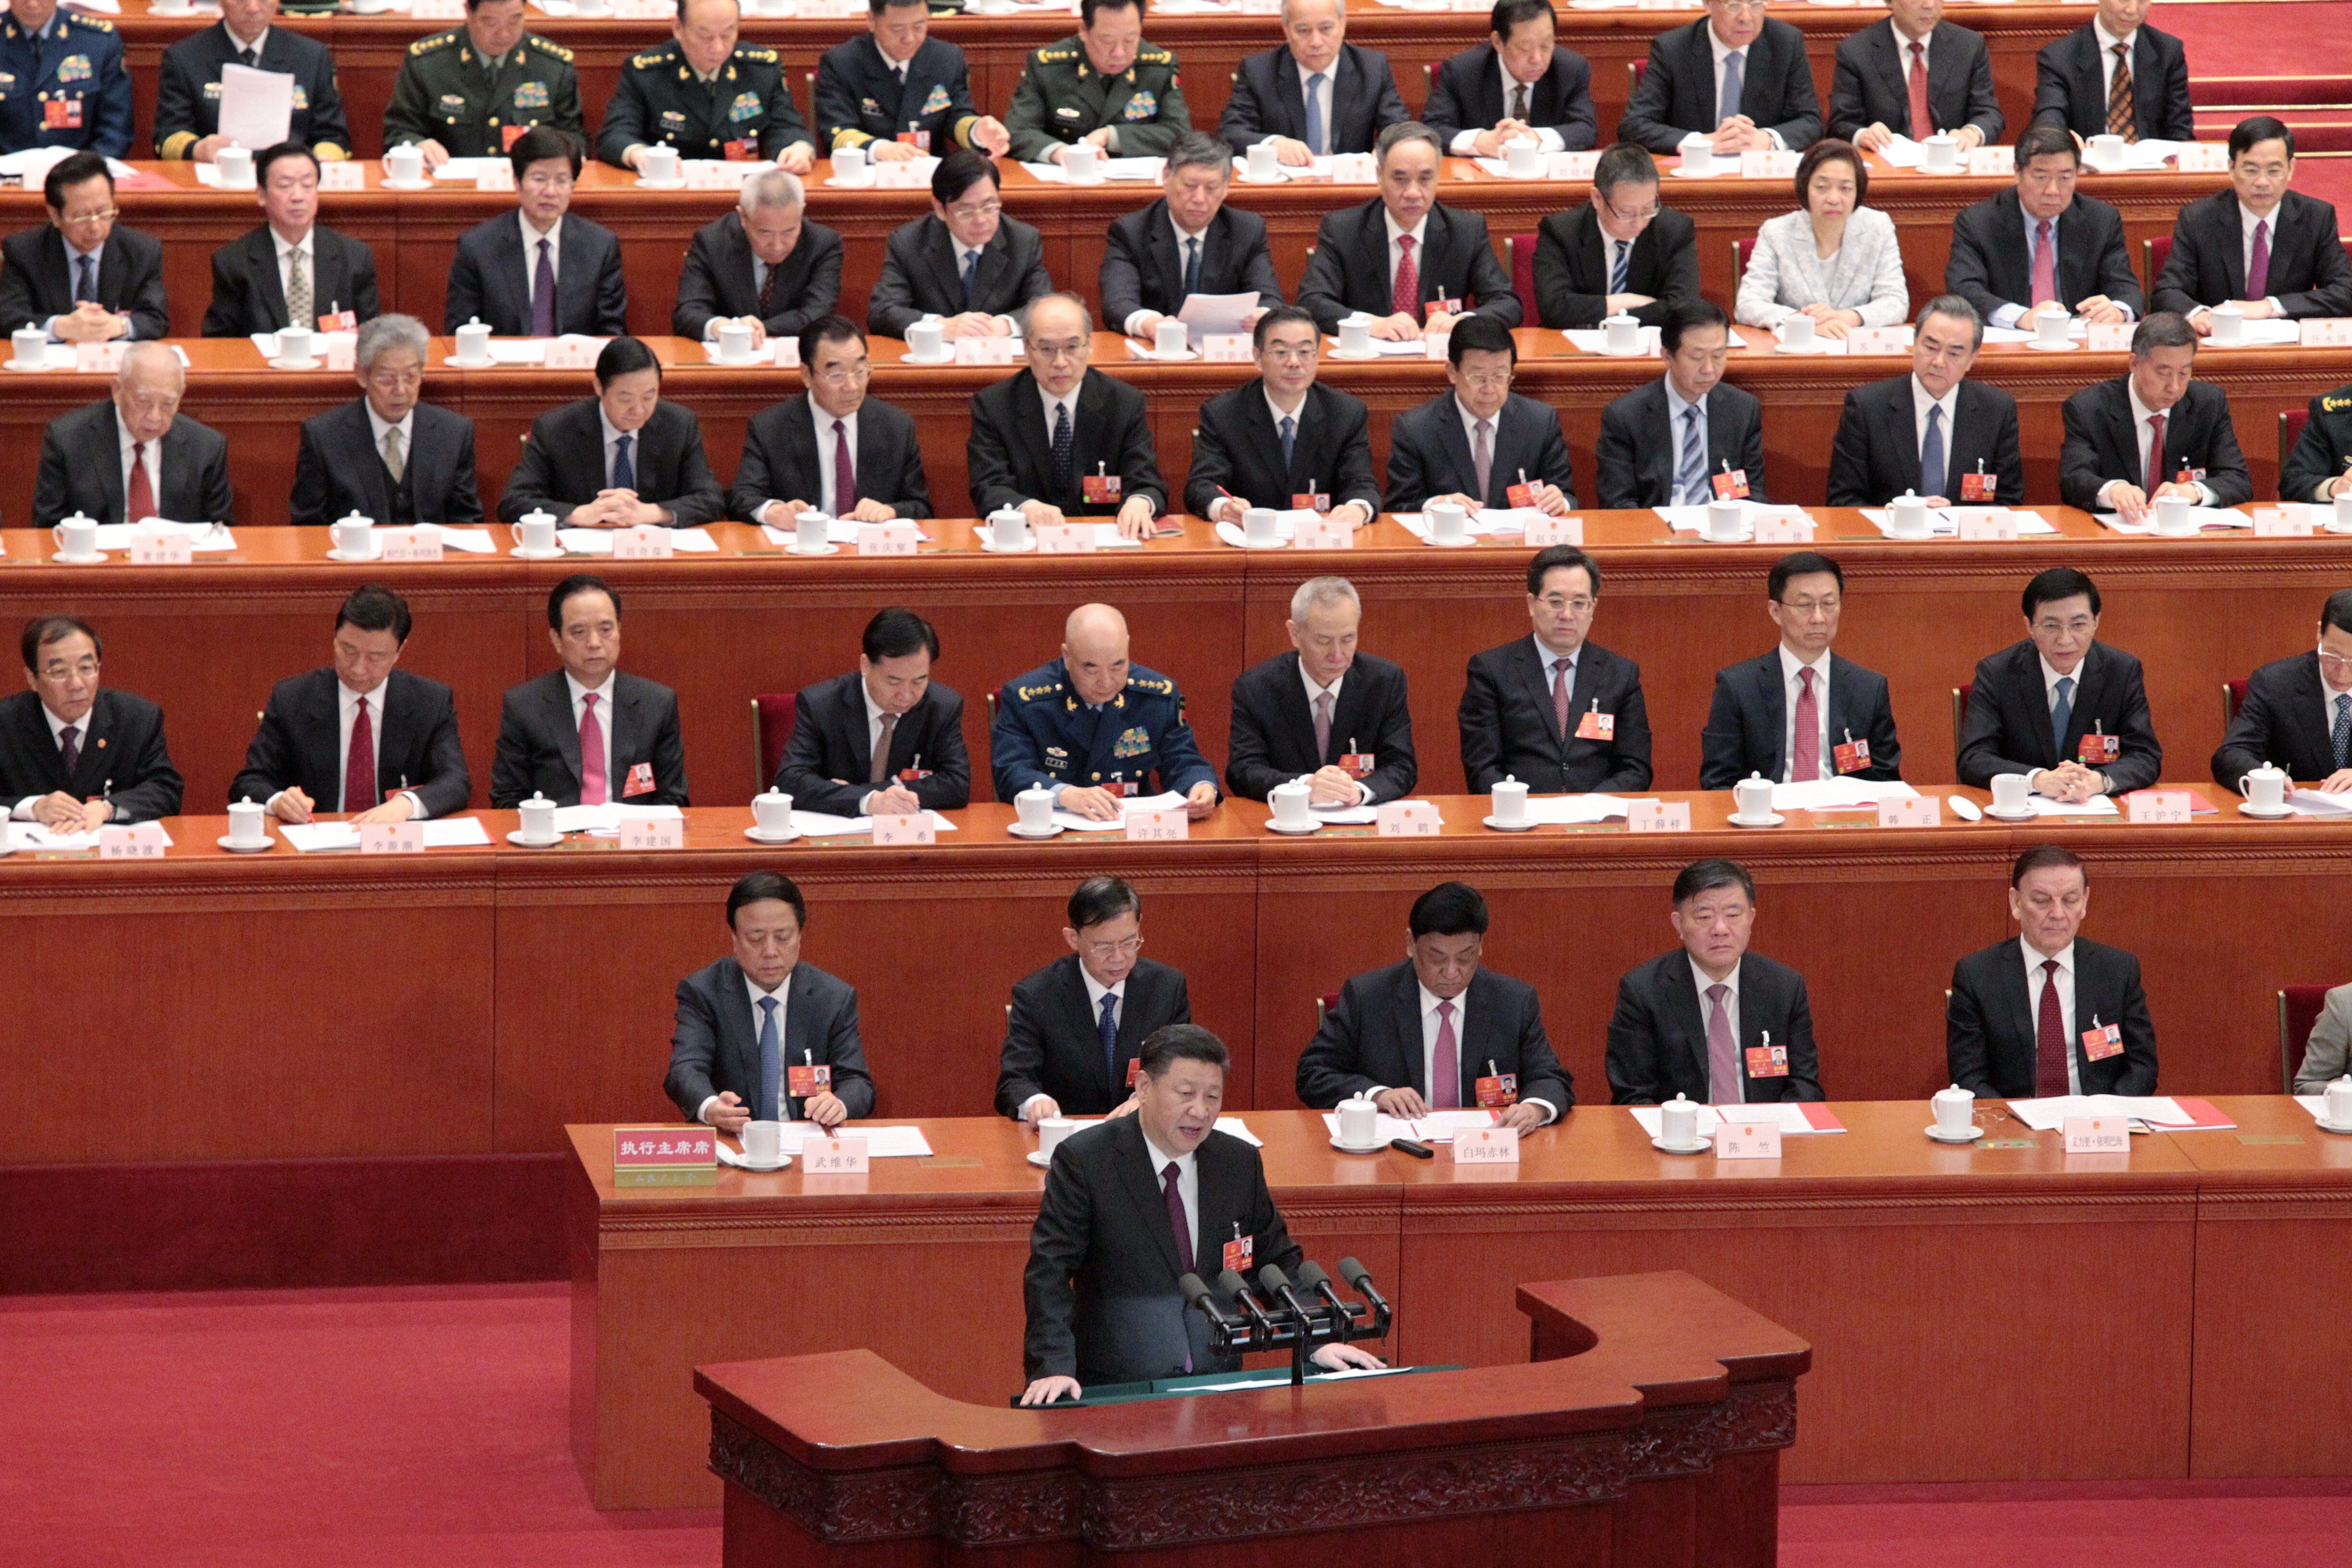 Chinese President Xi Jinping speaks at the Great Hall of the People in Beijing, surrounded by Communist Party members. Photo: Simon Song